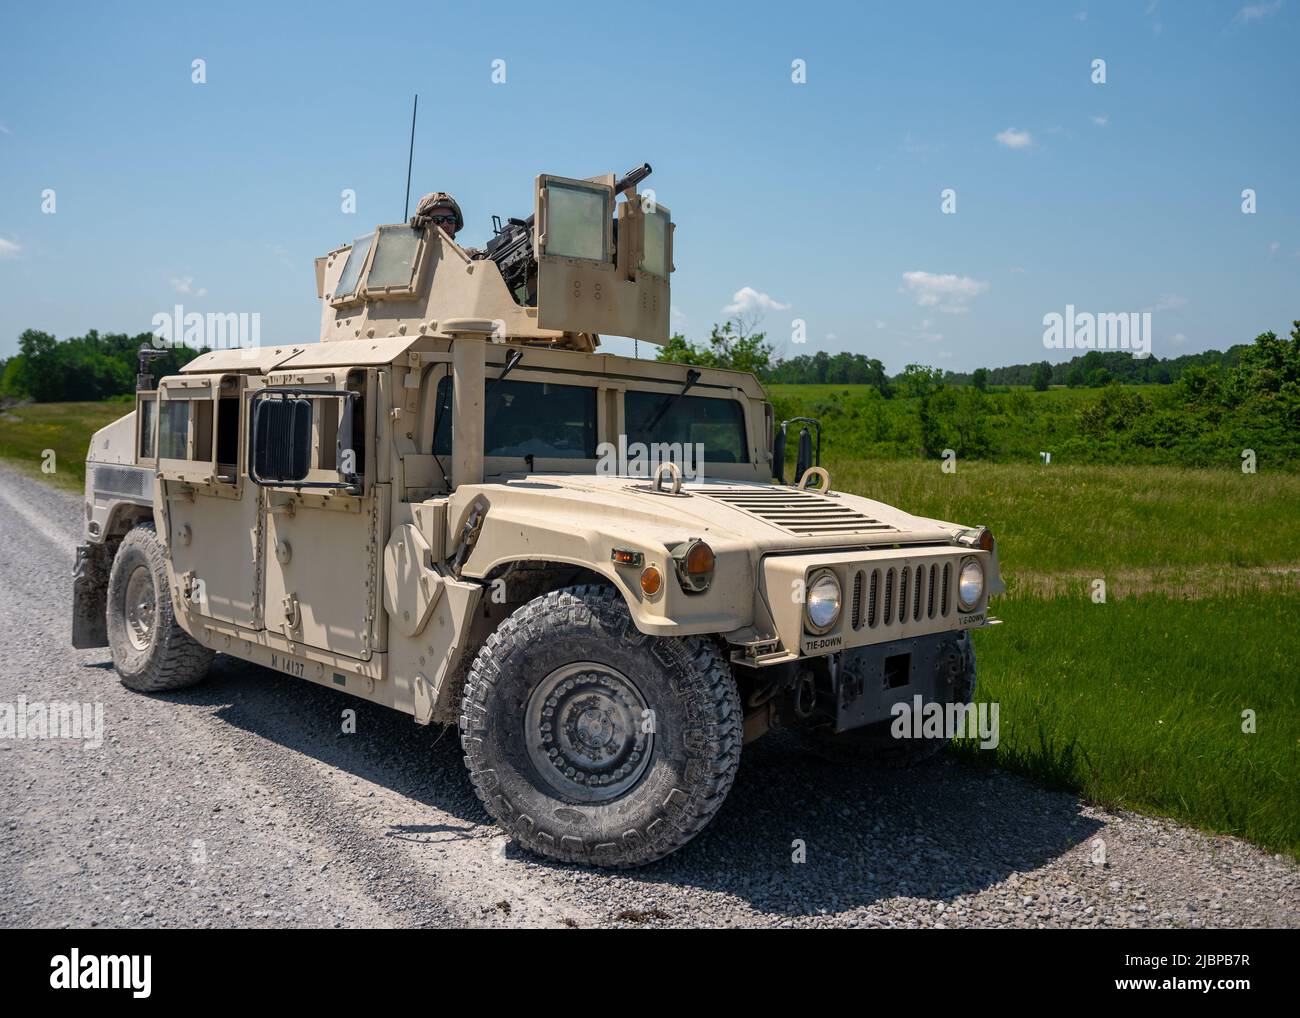 A U.S. Reserve Marine assigned to the Combined Anti-Armor Team, Weapons Company, 3rd Battalion, 23rd Marine Regiment, 4th Marine Division, secures a position with a MK19 40mm grenade machine gun mounted on a Humvee during a mission rehearsal exercise at Fort Campbell, Kentucky, May 19, 2022. Weapons Company convened with other units from 3/23 at Fort Campbell for a mission rehearsal exercise to prepare for the upcoming Integrated Training Exercise 4-22 in the summer of 2022. The Combined Anti-Armor Team Marines conducted machine gun ranges and convoy operations with quick reaction drills. (U.S Stock Photo